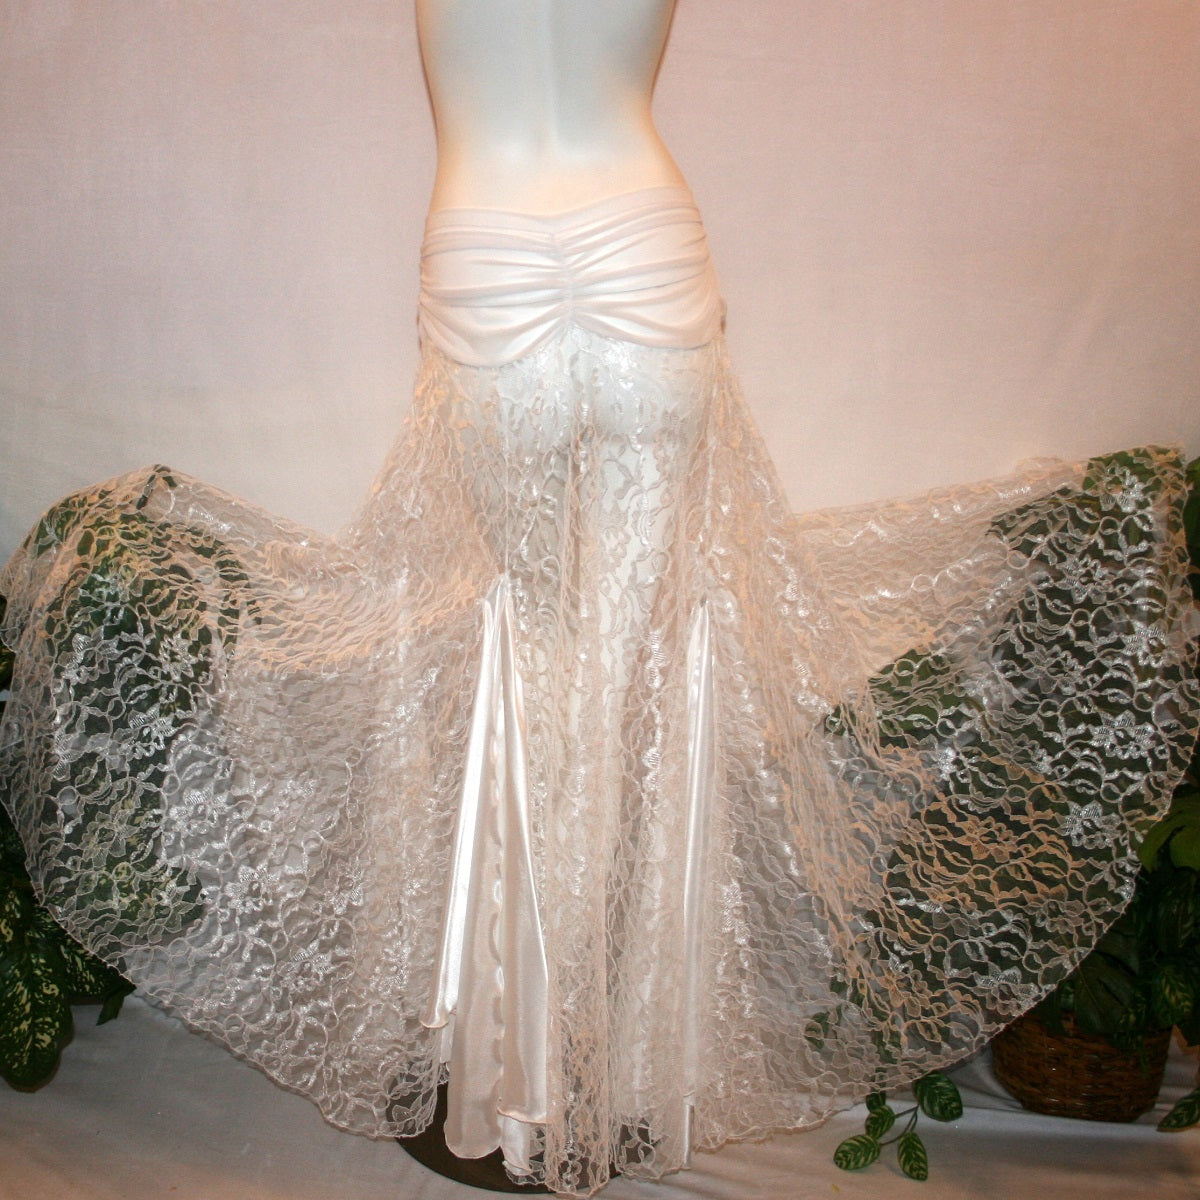 flaired back view of White ballroom skirt created of yards of white lace with a white sheer stretch mesh ruched hip band, has inset panels & floats of white stretch satin.